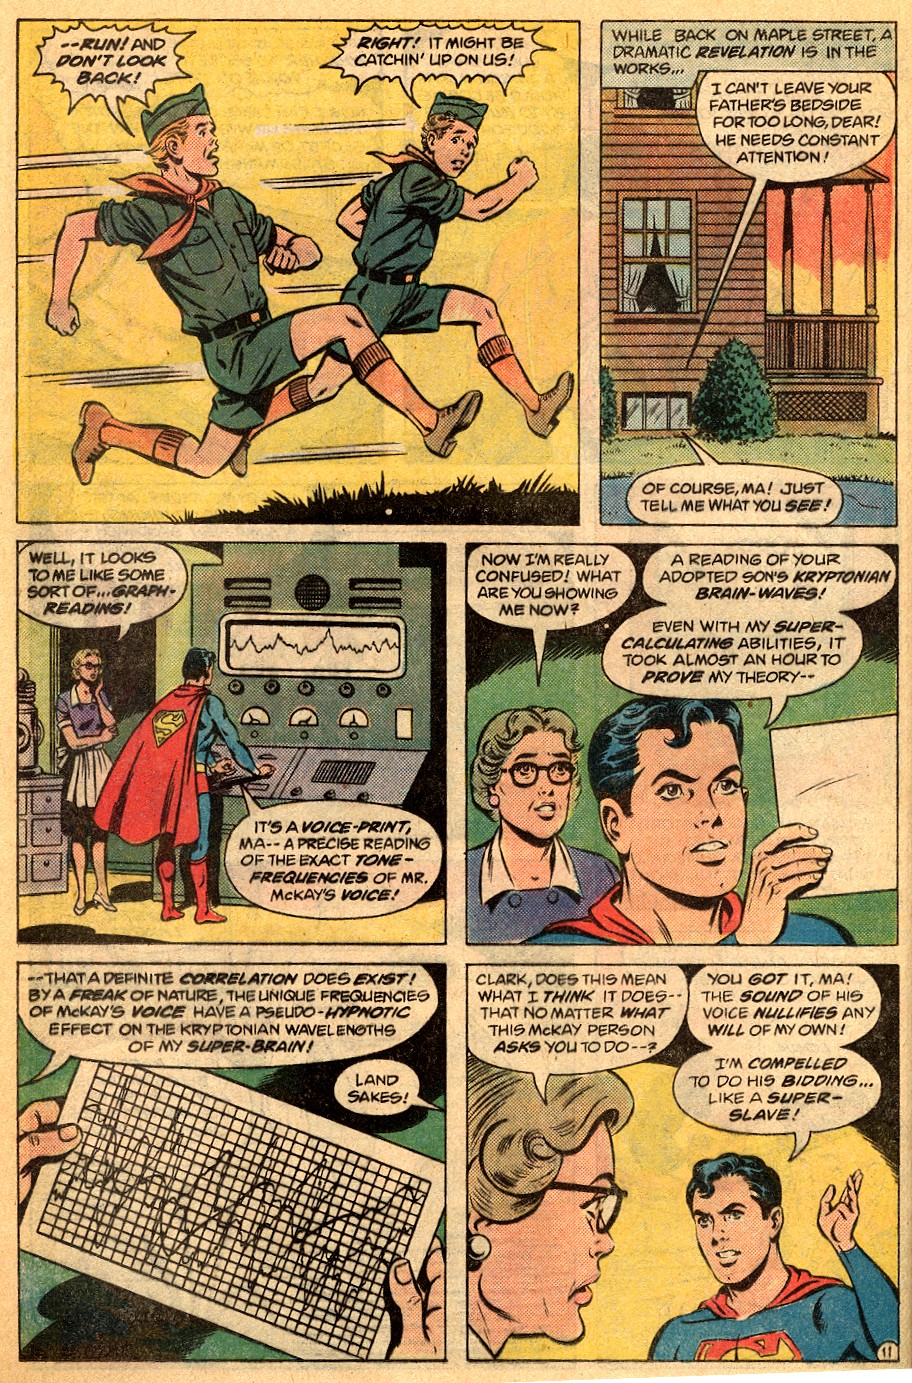 The New Adventures of Superboy 21 Page 15